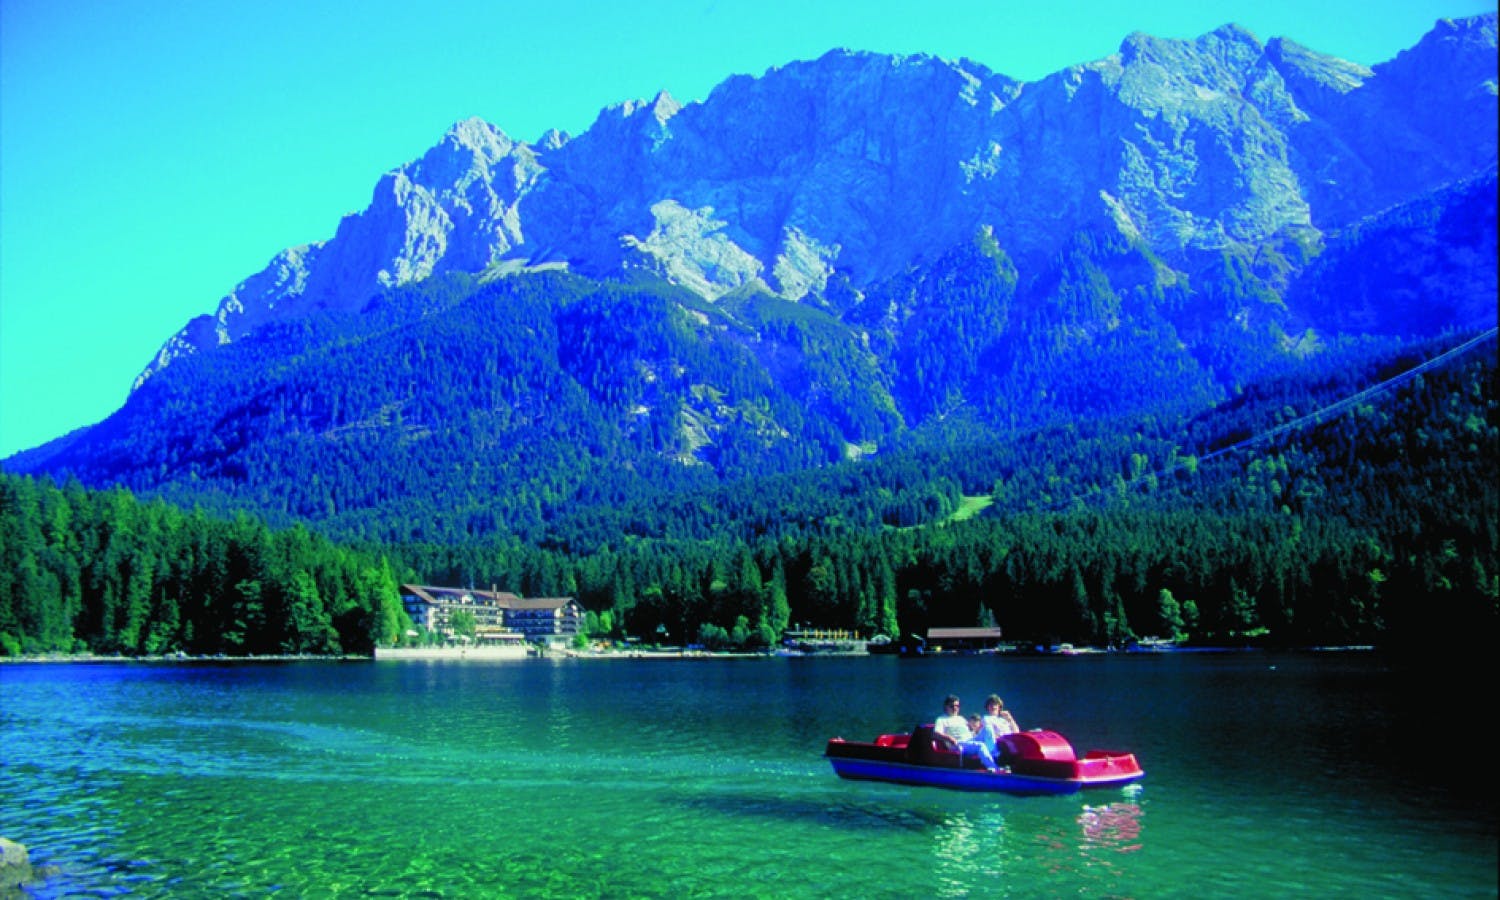 Ettal Monastery and Zugspitze Day Tour from Munich